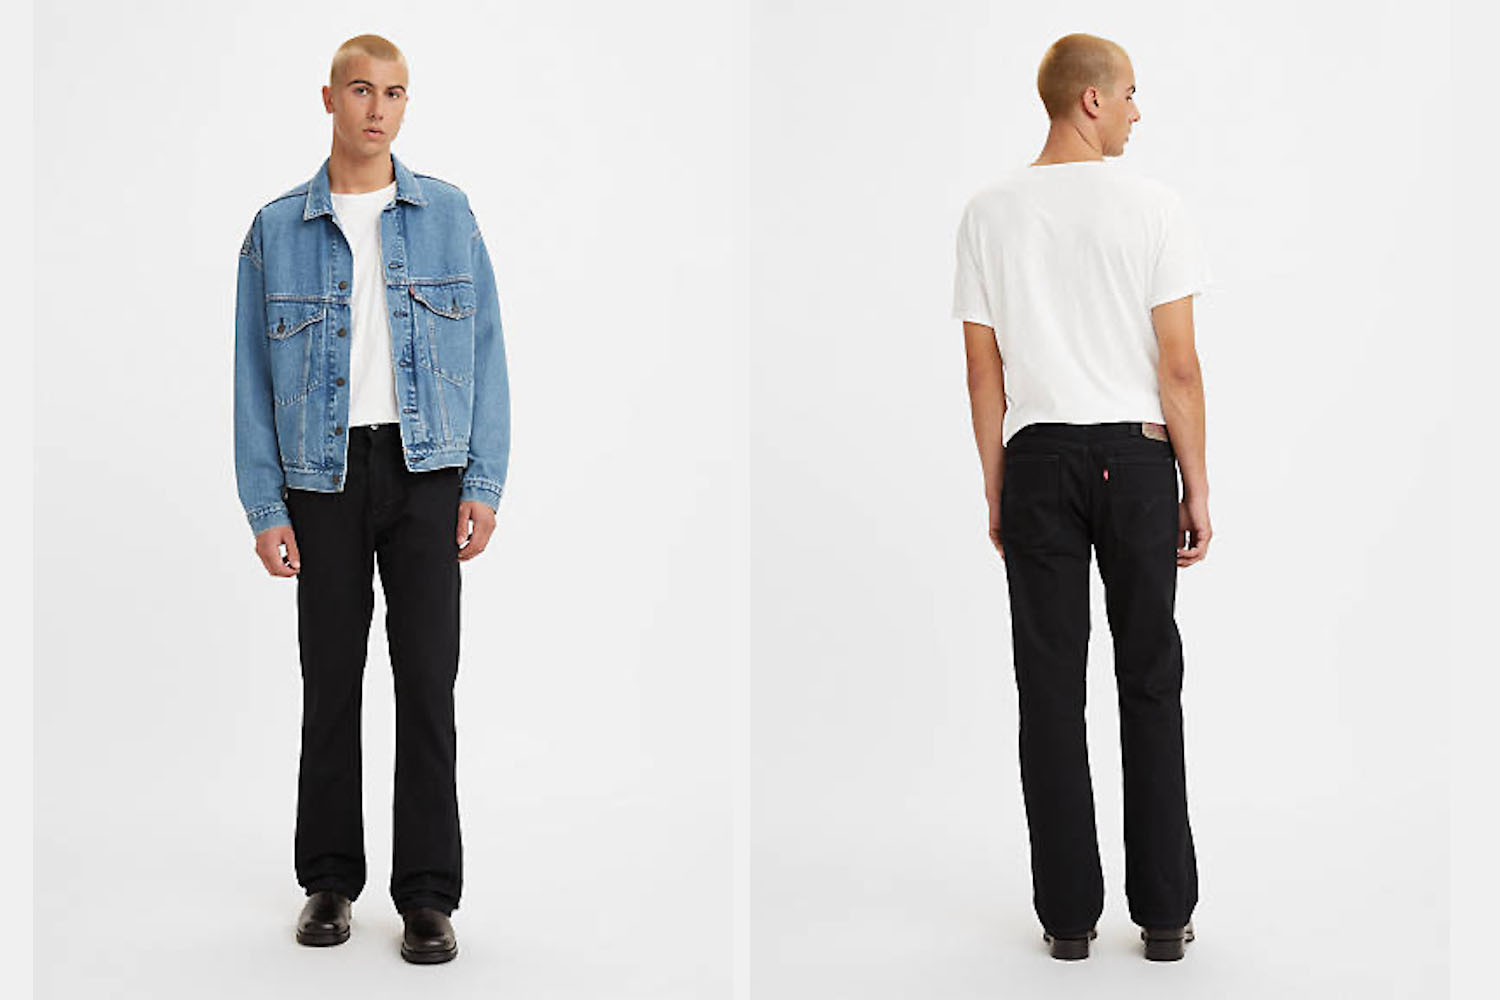 two model shots of the Levi's Bootcut 517 jeans on a white background